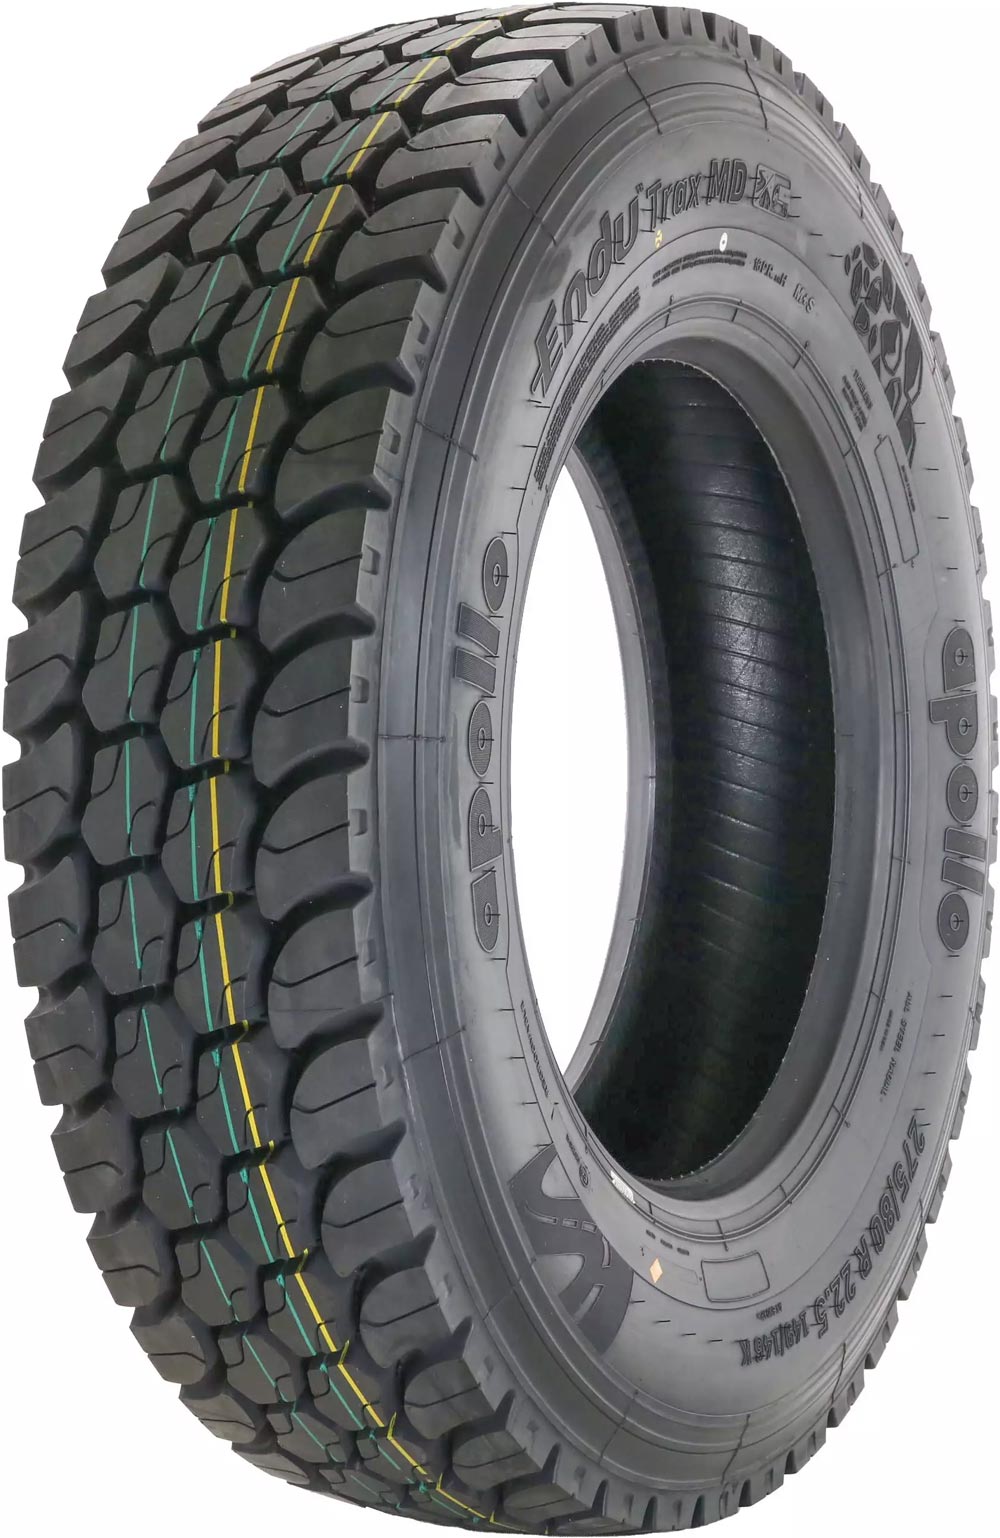 product_type-heavy_tires APOLLO EnduTrax MD 13 R22.5 156K